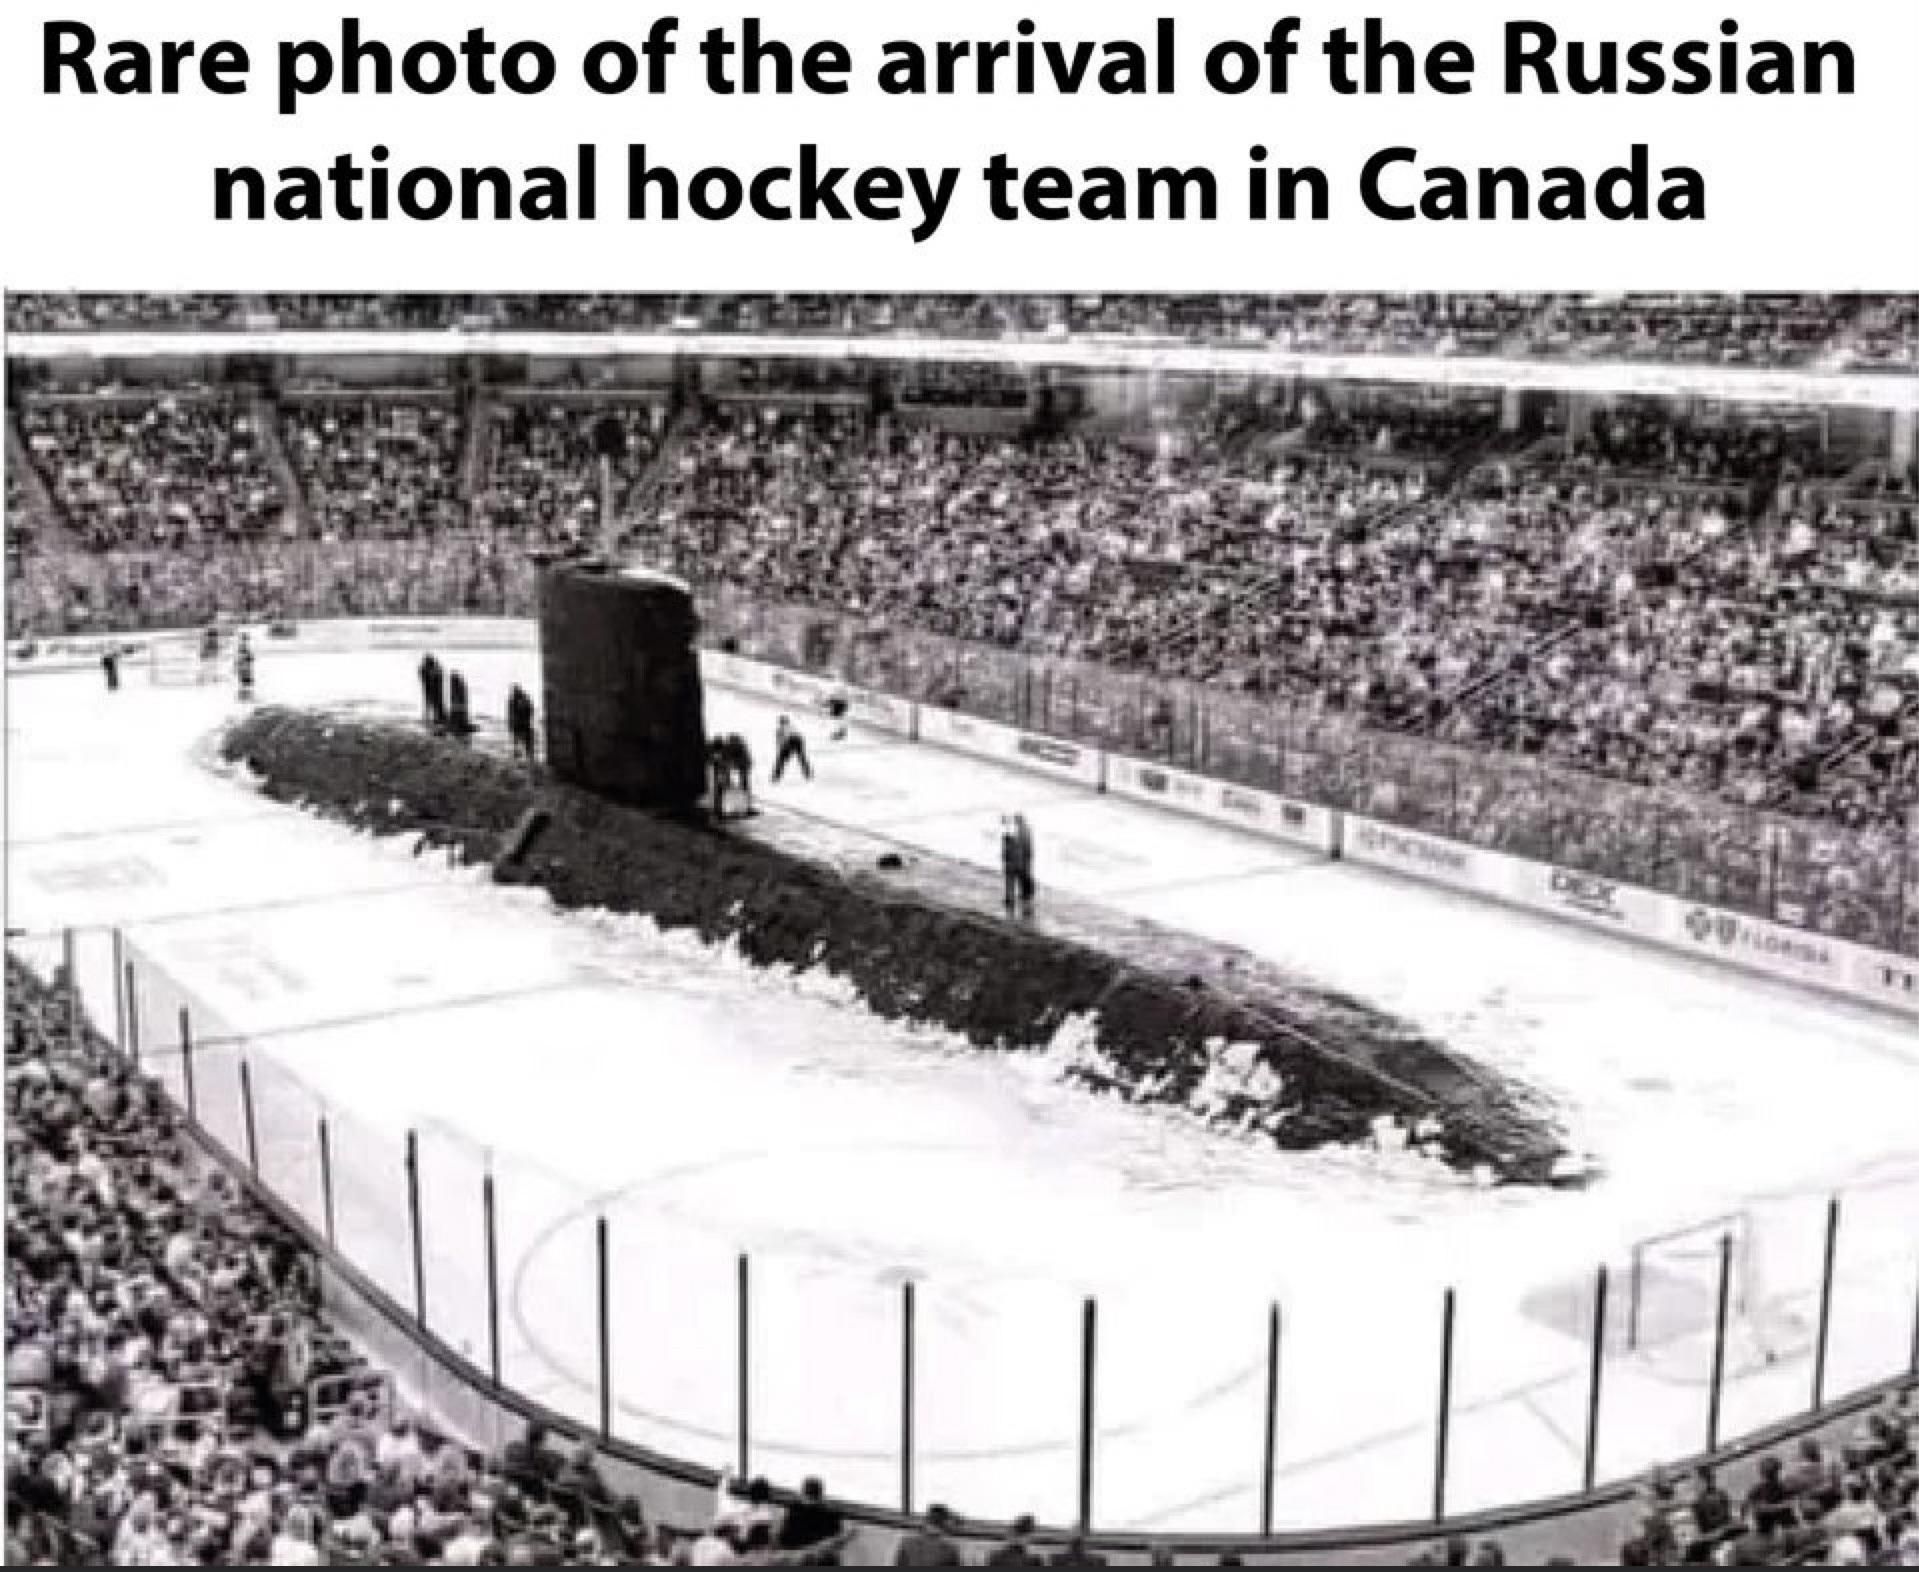 Rare photo of the arrival of the Russian national hockey team in Canada 1972